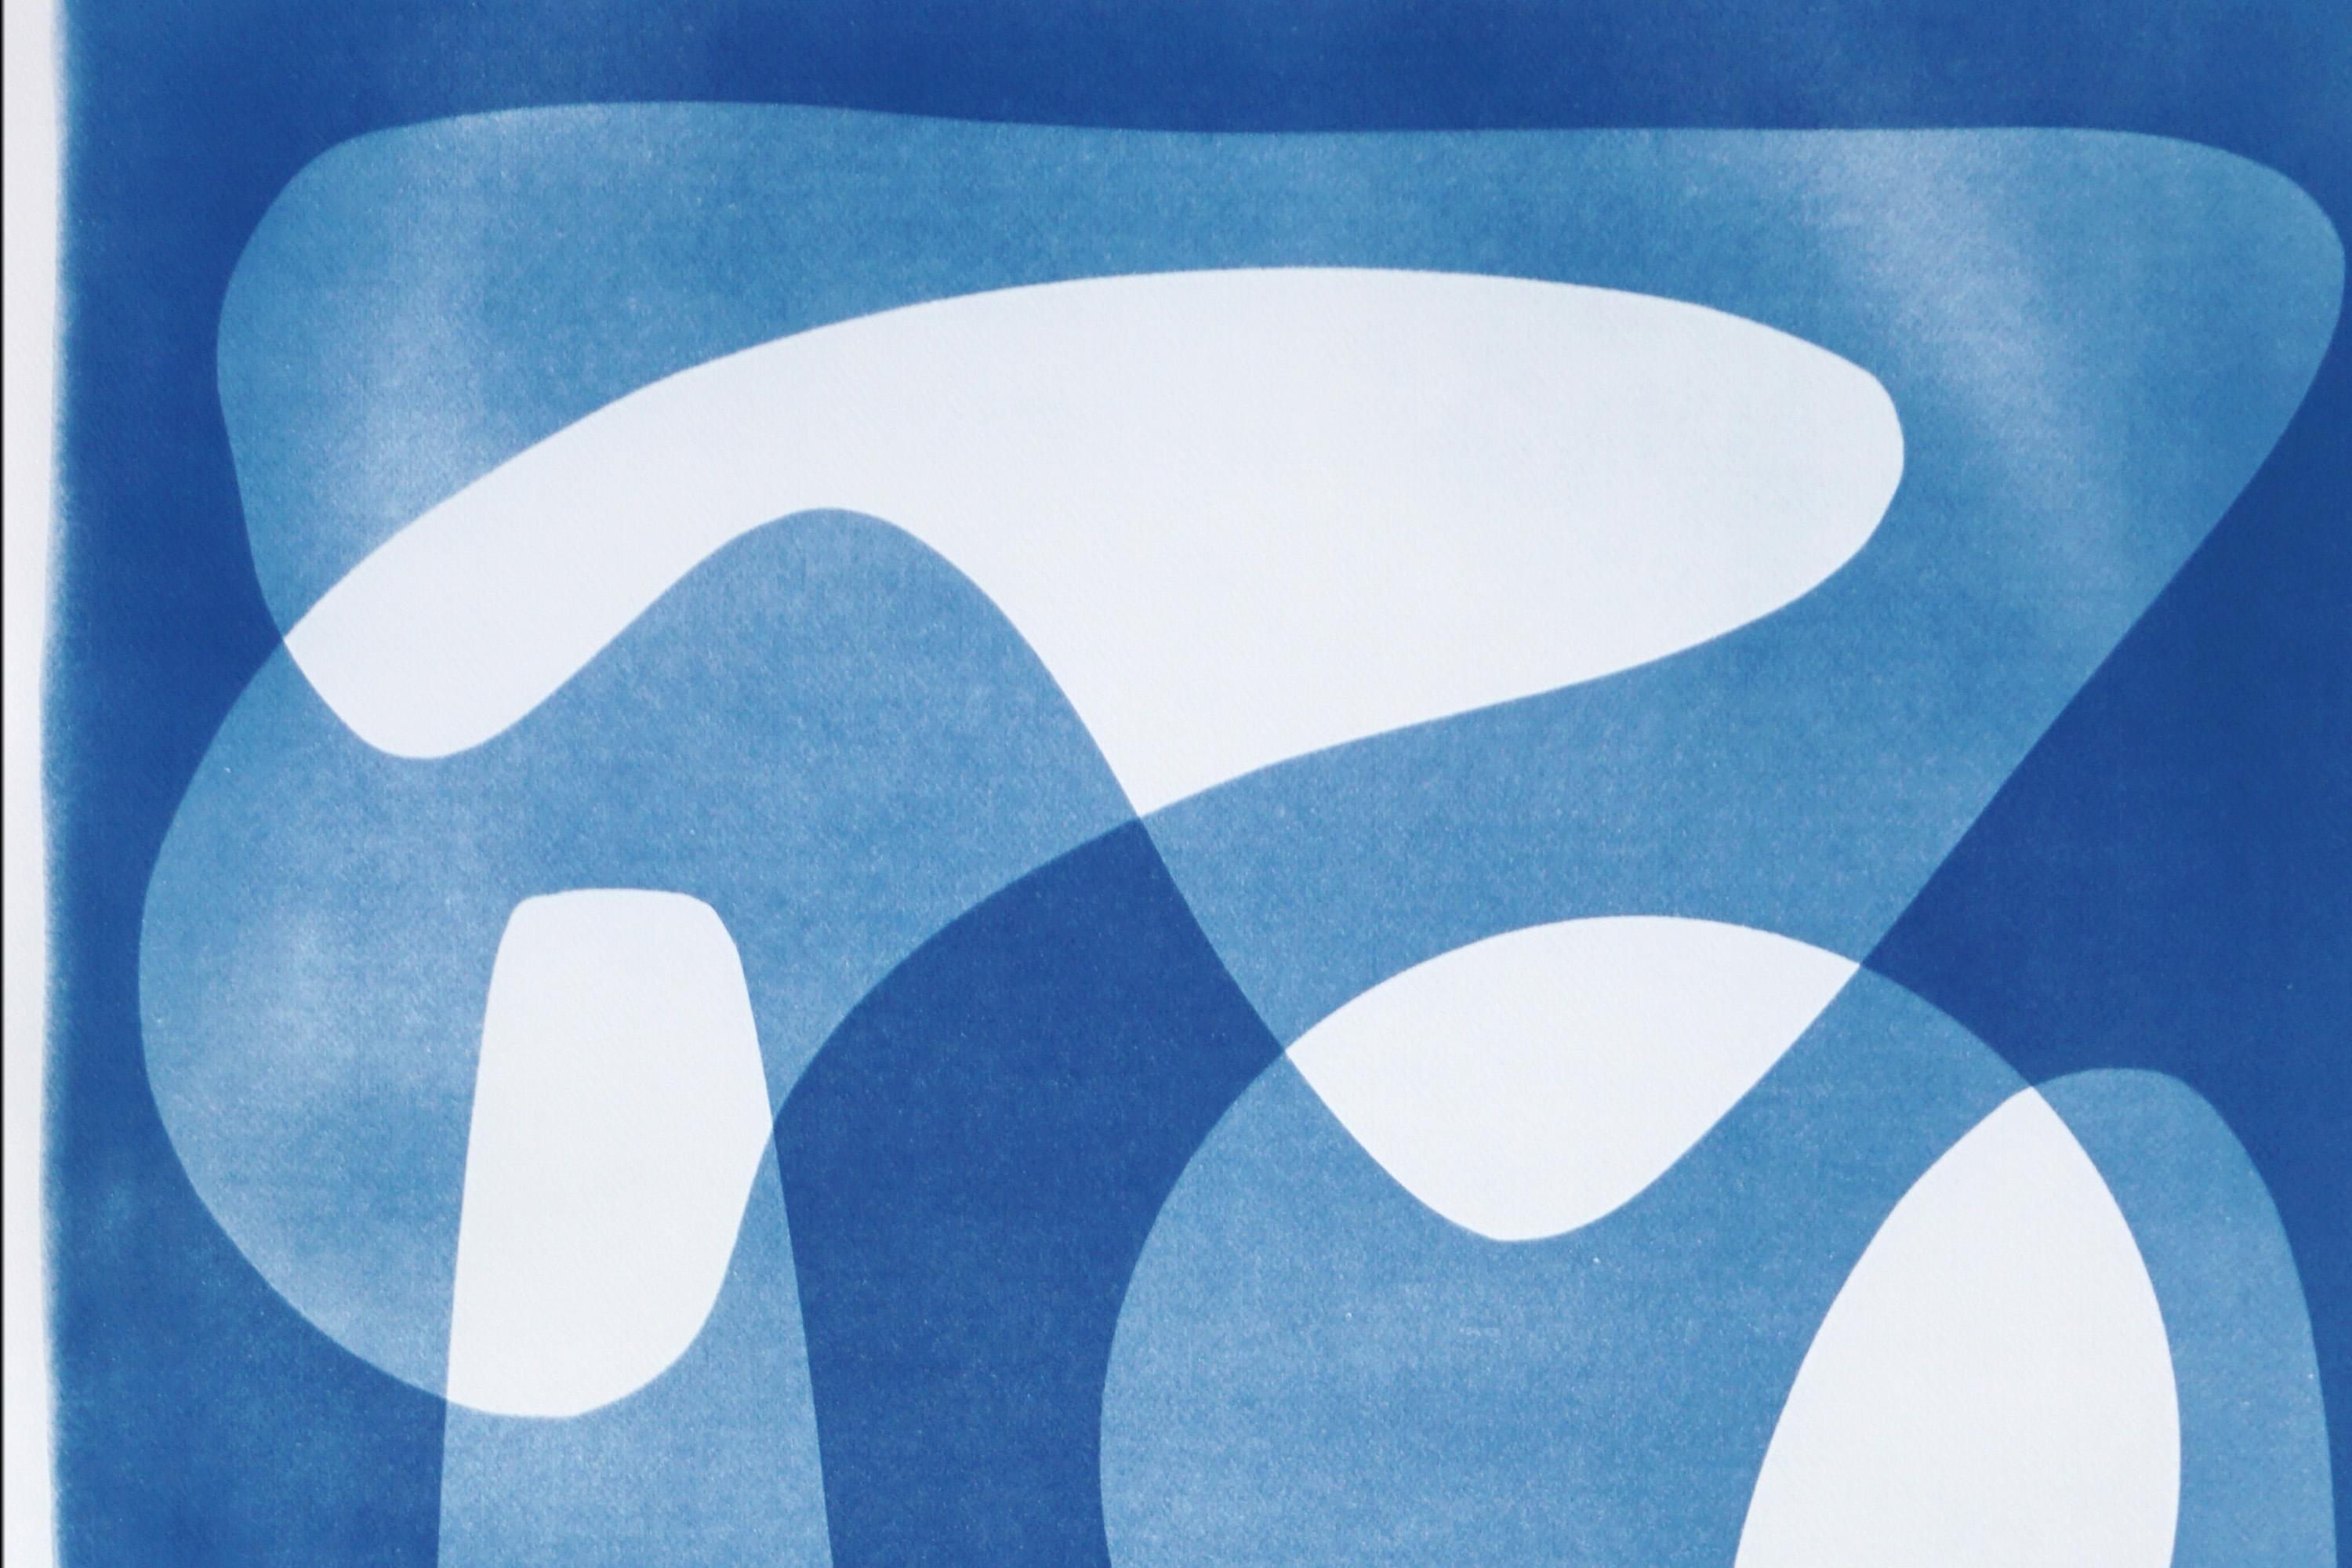 Handmade Cyanotype in White and Blue, Mid Century Modern Abstract Shapes, Paper - Bauhaus Photograph by Kind of Cyan